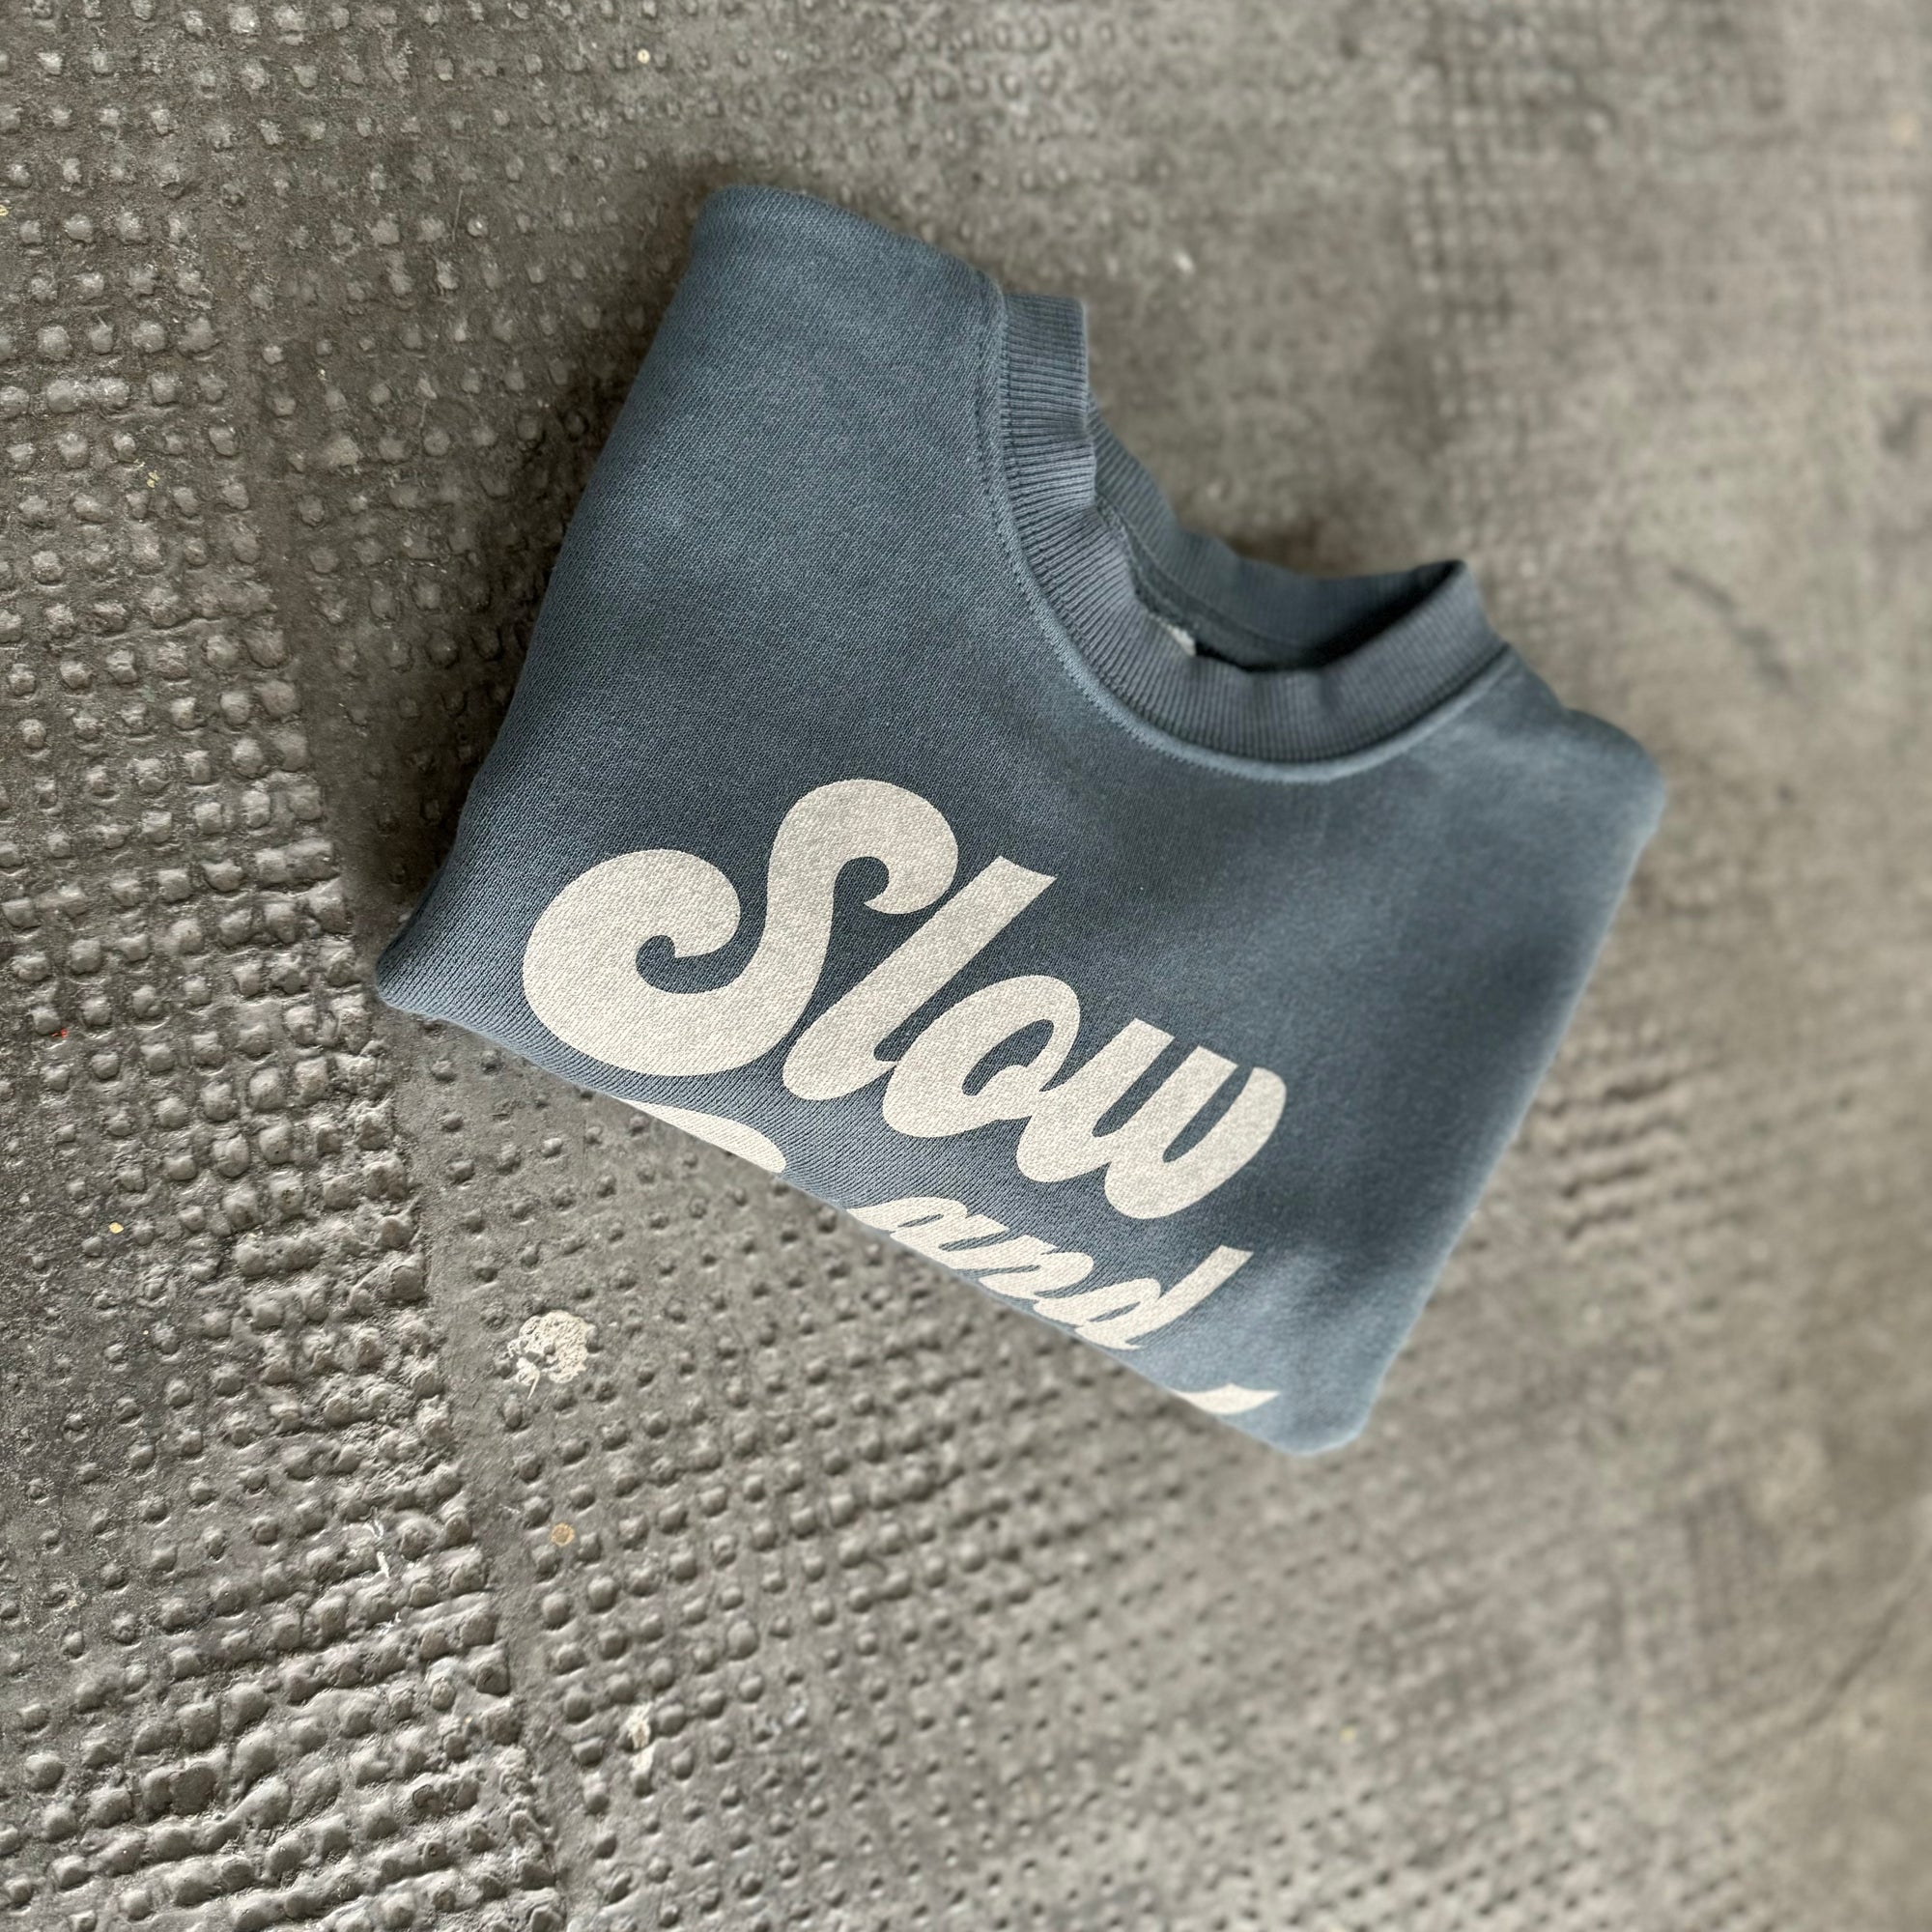 Slow Sweatshirt find Stylish Fashion for Little People- at Little Foxx Concept Store